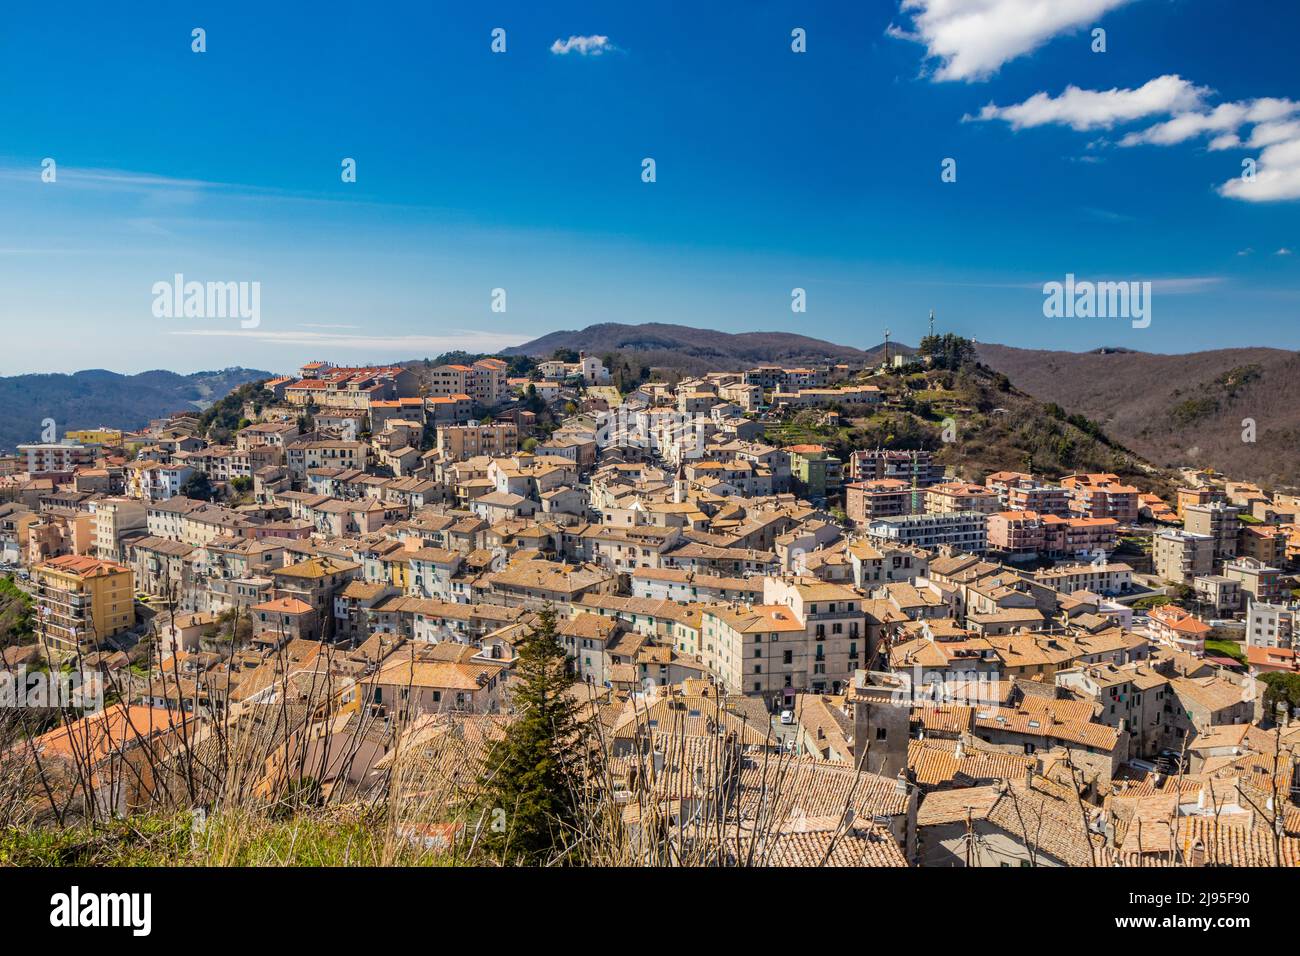 The small village of Tolfa, in Lazio. The view of the town perched on the mountain. Above, the church of the Capuchin monastery. The roofs of the hous Stock Photo